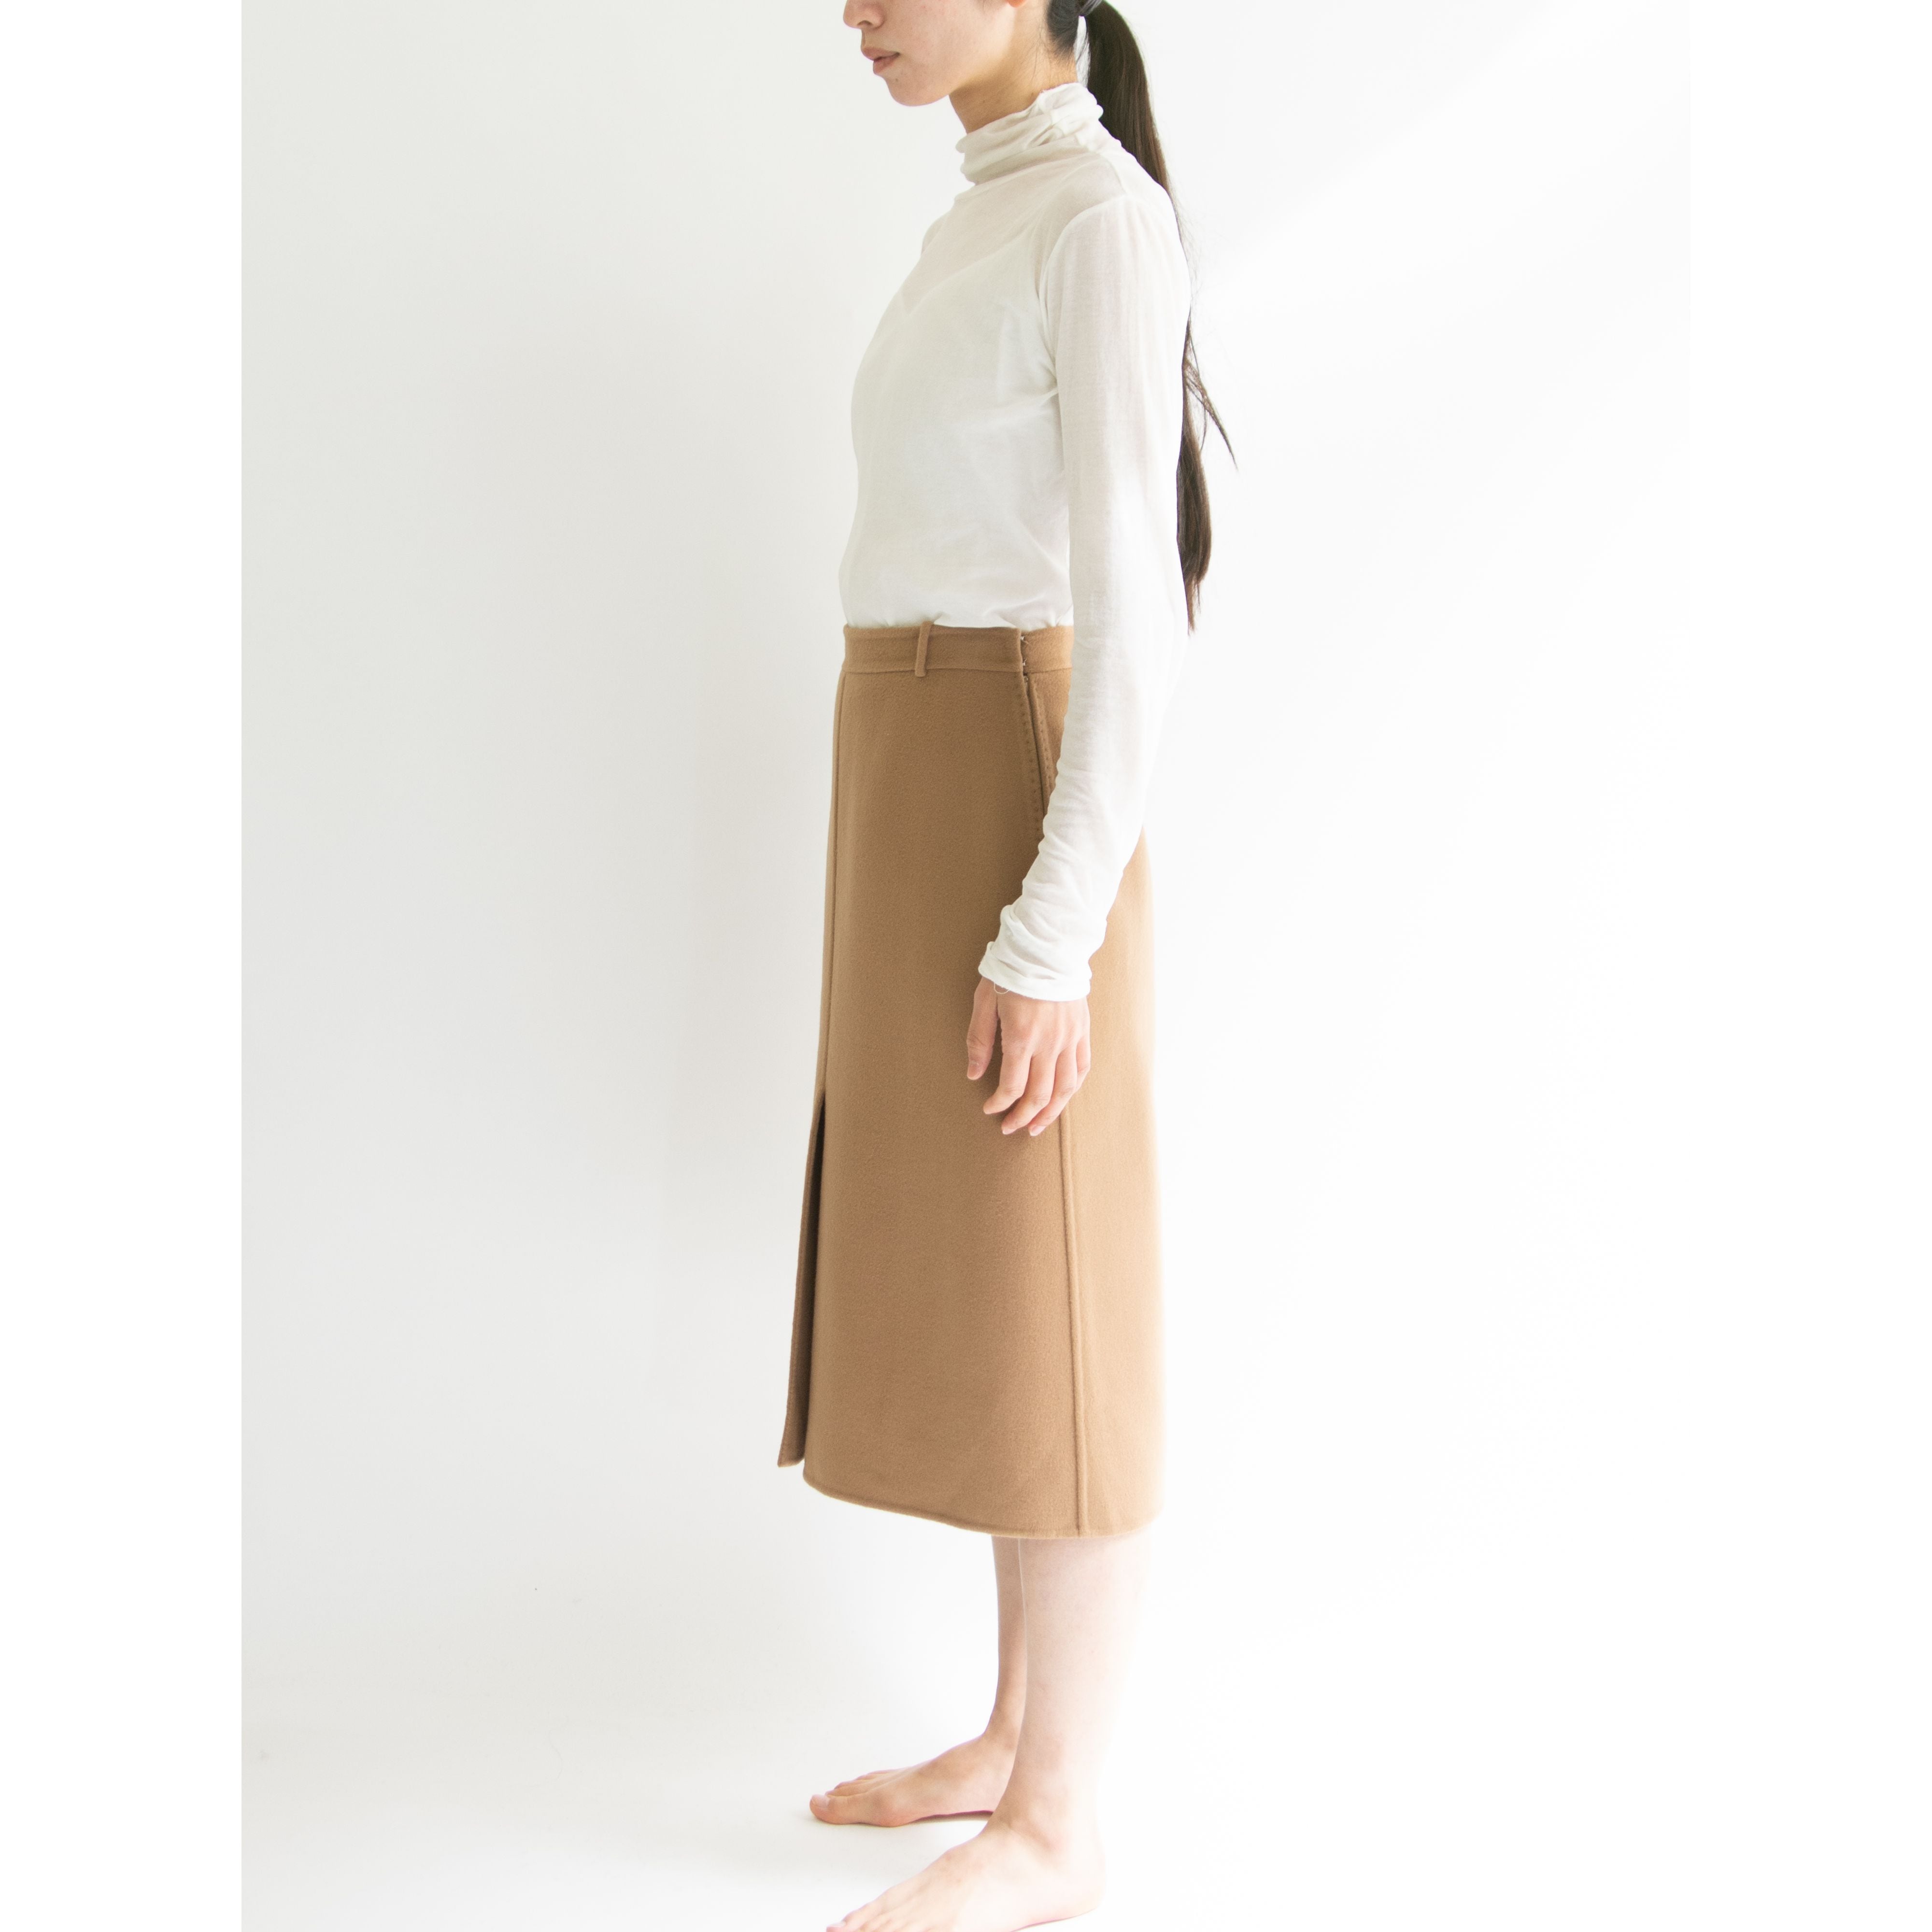 【KAMANTA】Hand Made in Italy 70's Wool-Cashmere Doubleface Skirt（カマンタ  イタリア製ウールカシミヤ ダブルフェイススカート） | MASCOT/E powered by BASE